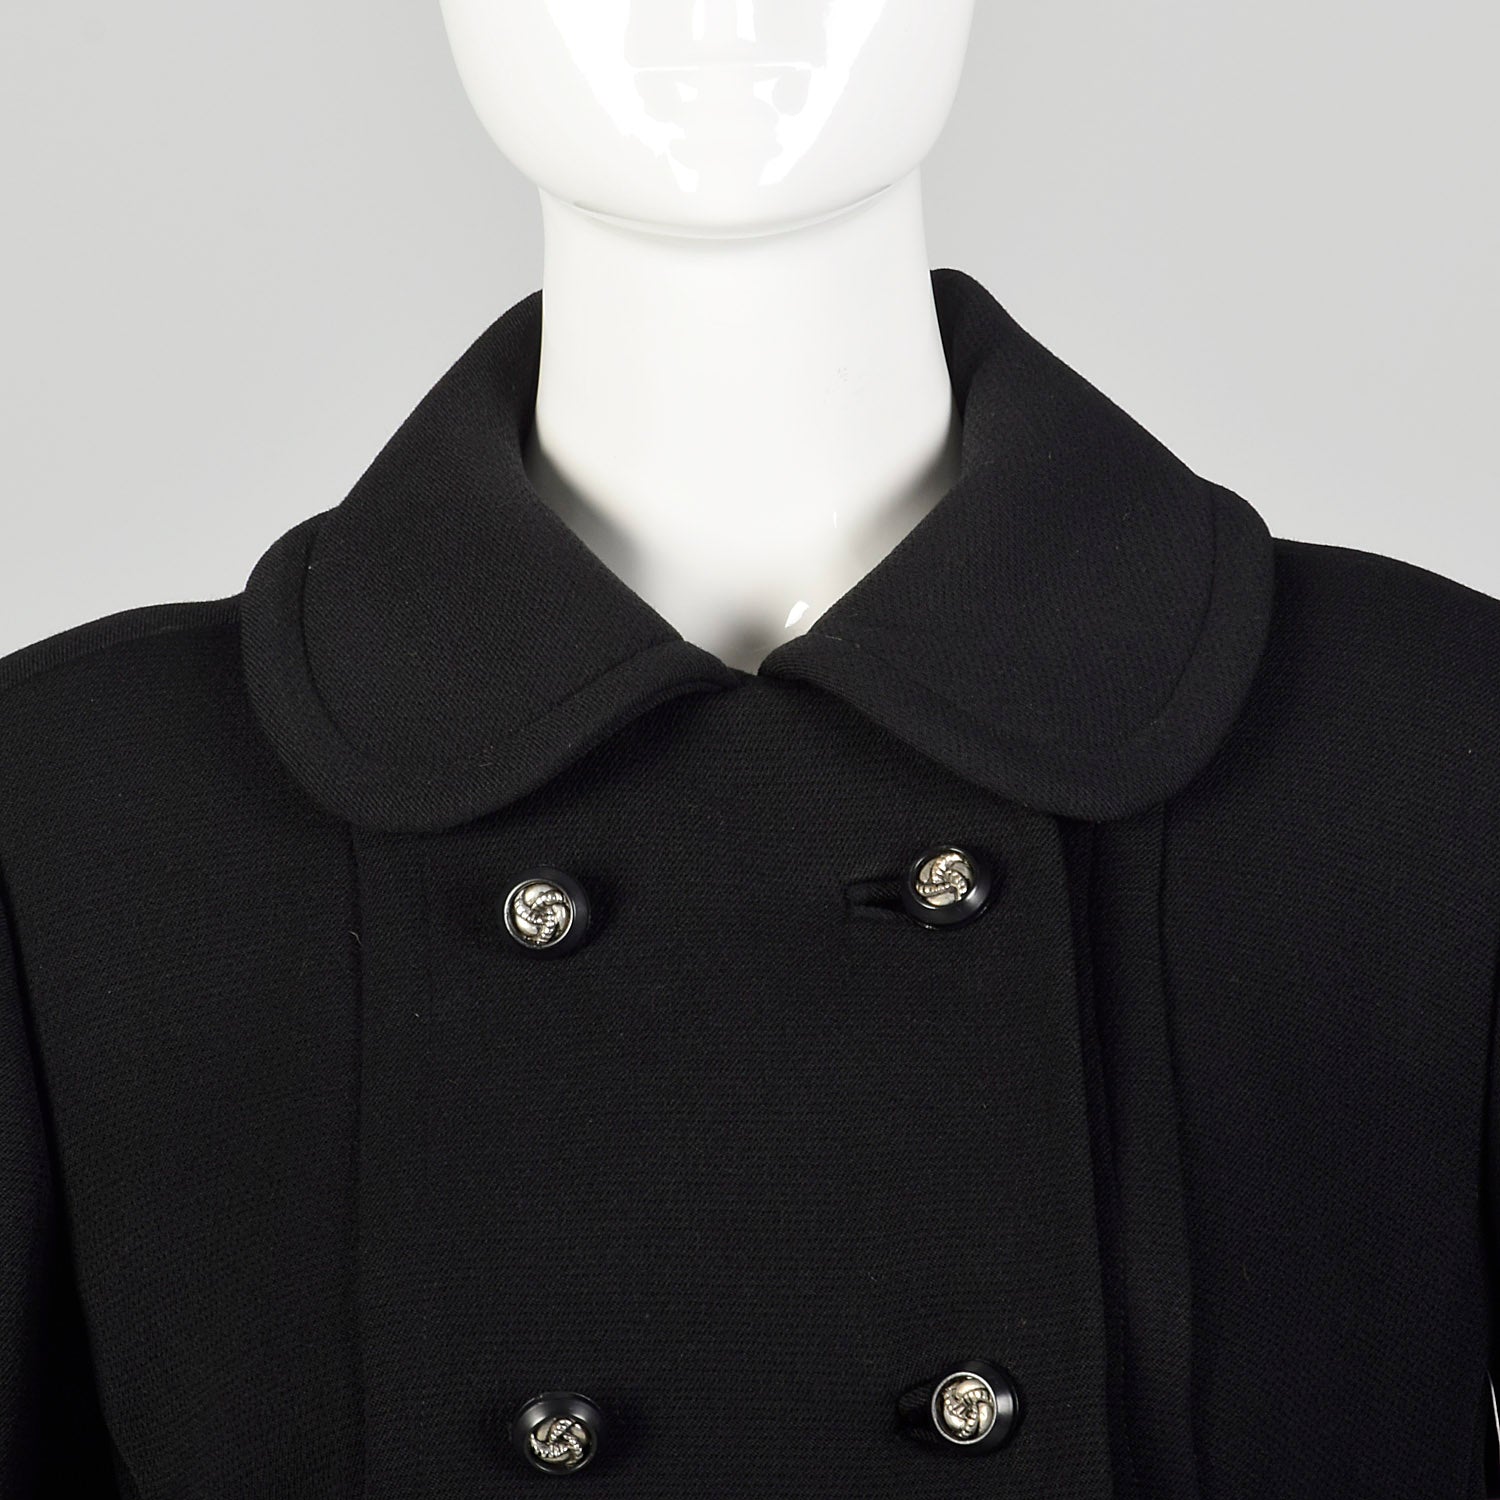 Small 1960s Mod Black Coat Double Breasted Military Style